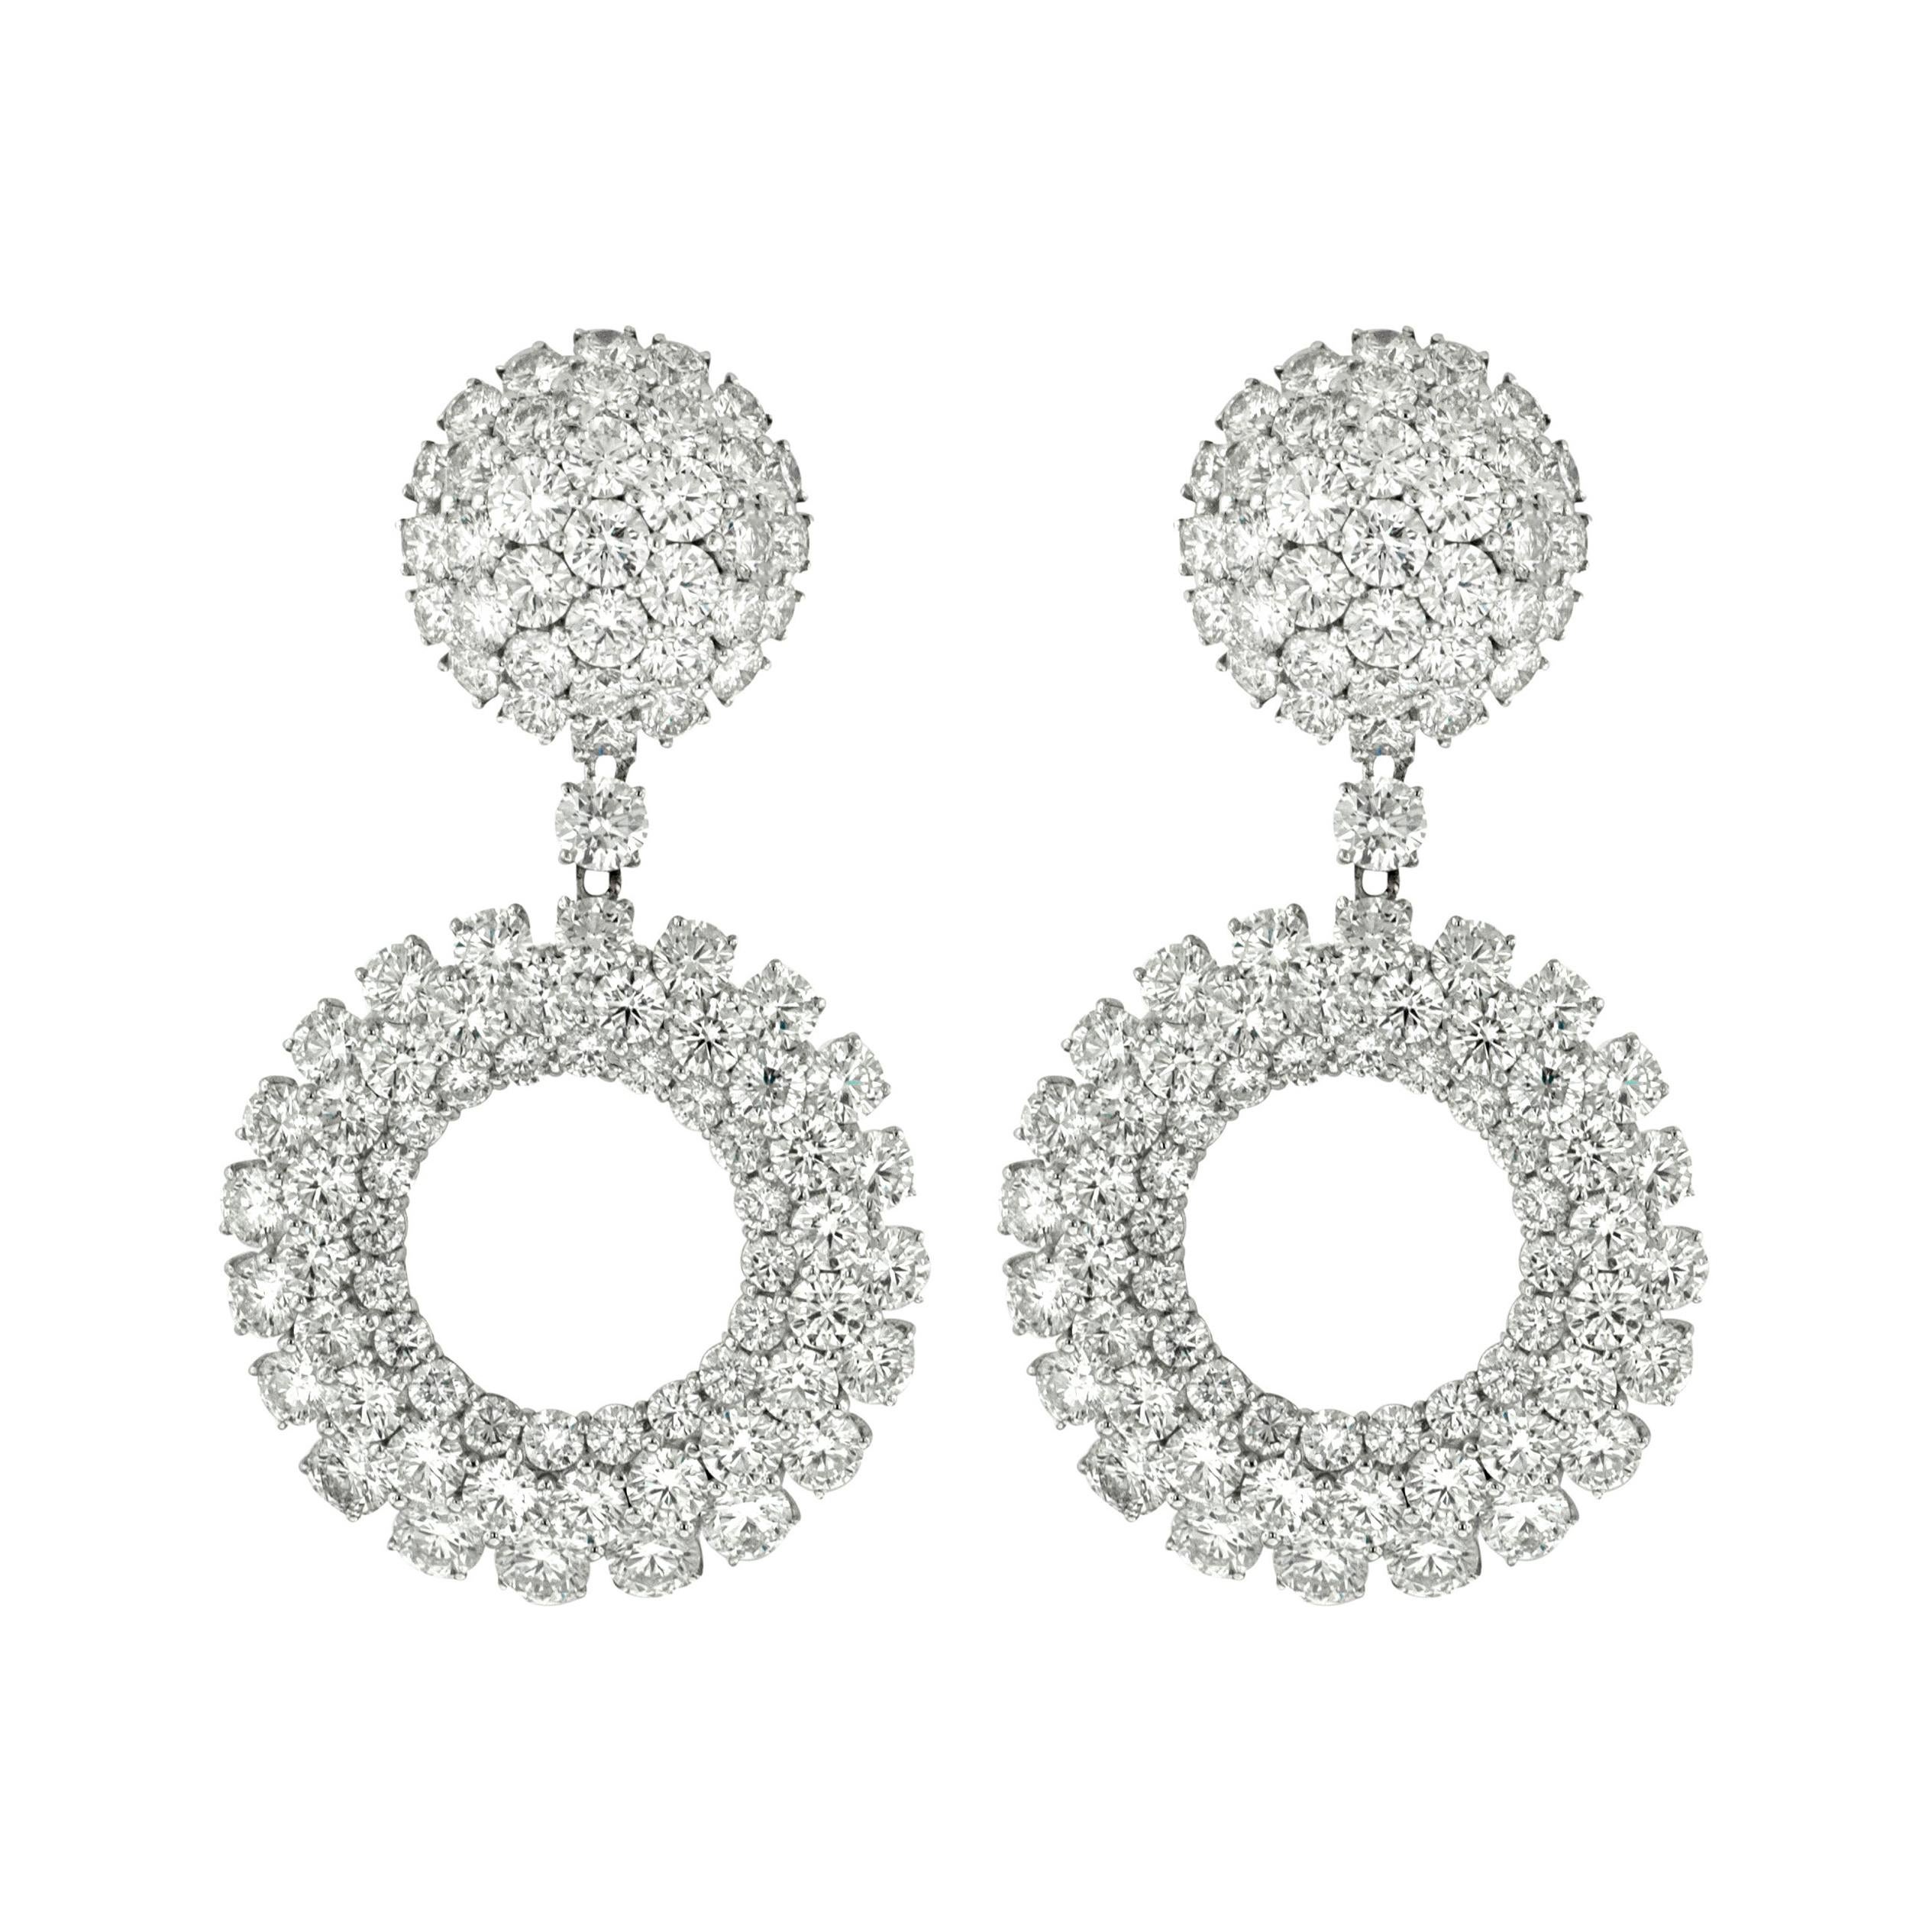 Circle Pave Fashion Diamond Earrings with Brilliant Cut Diamonds in White Gold For Sale